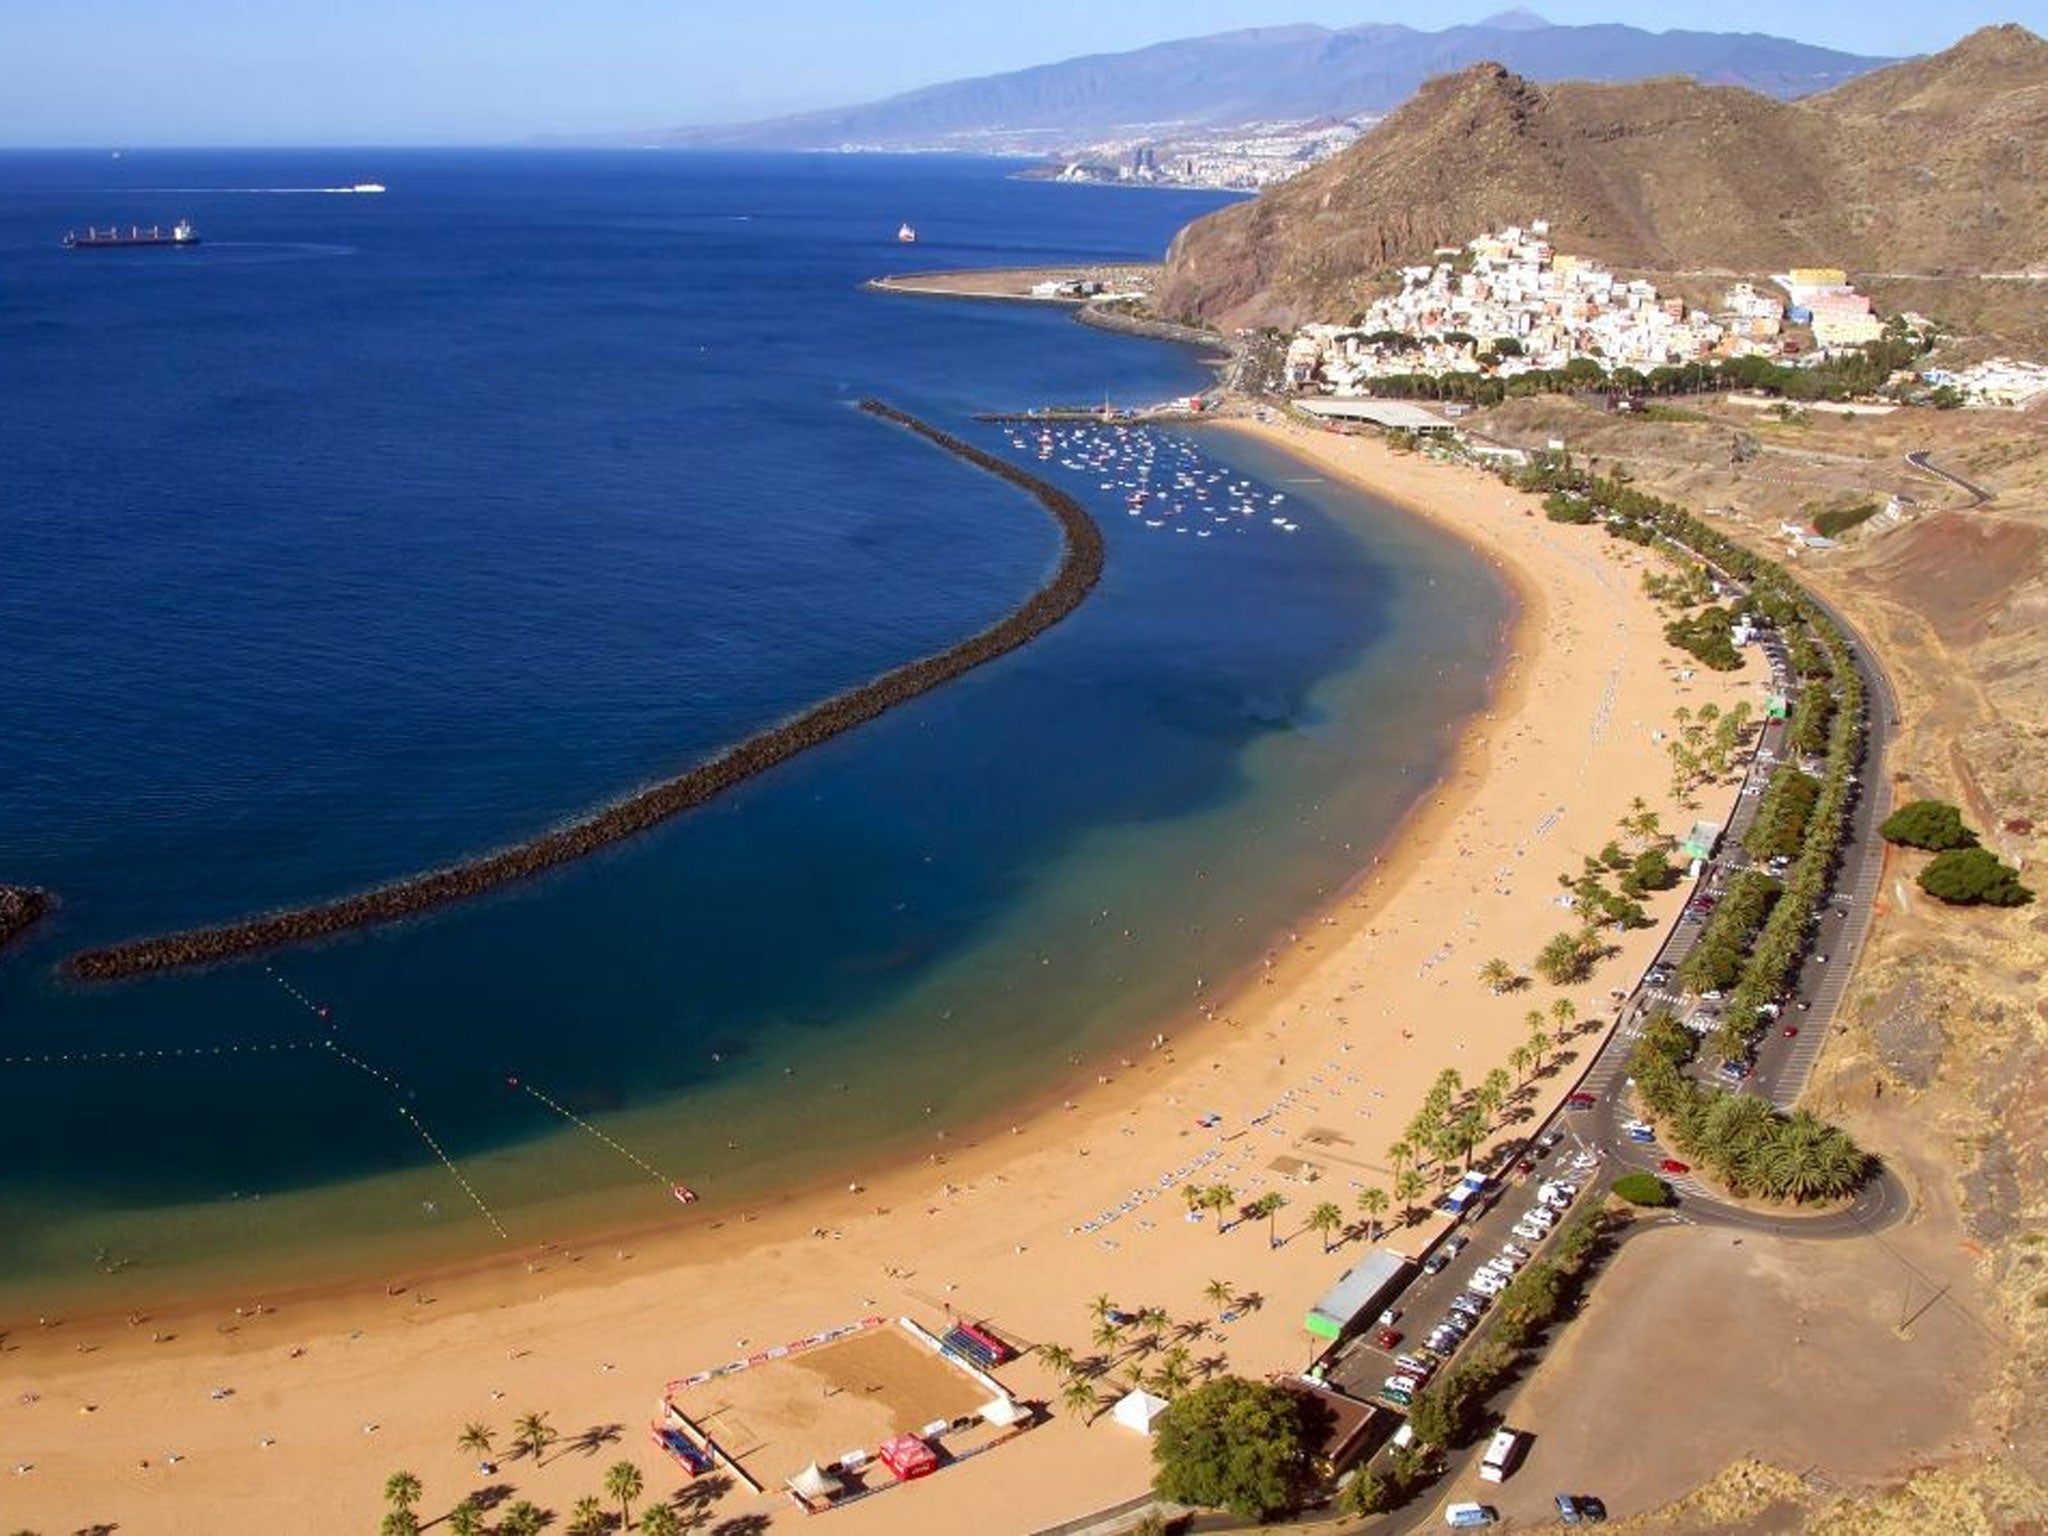 Travellers to Tenerife no longer have to quarantine